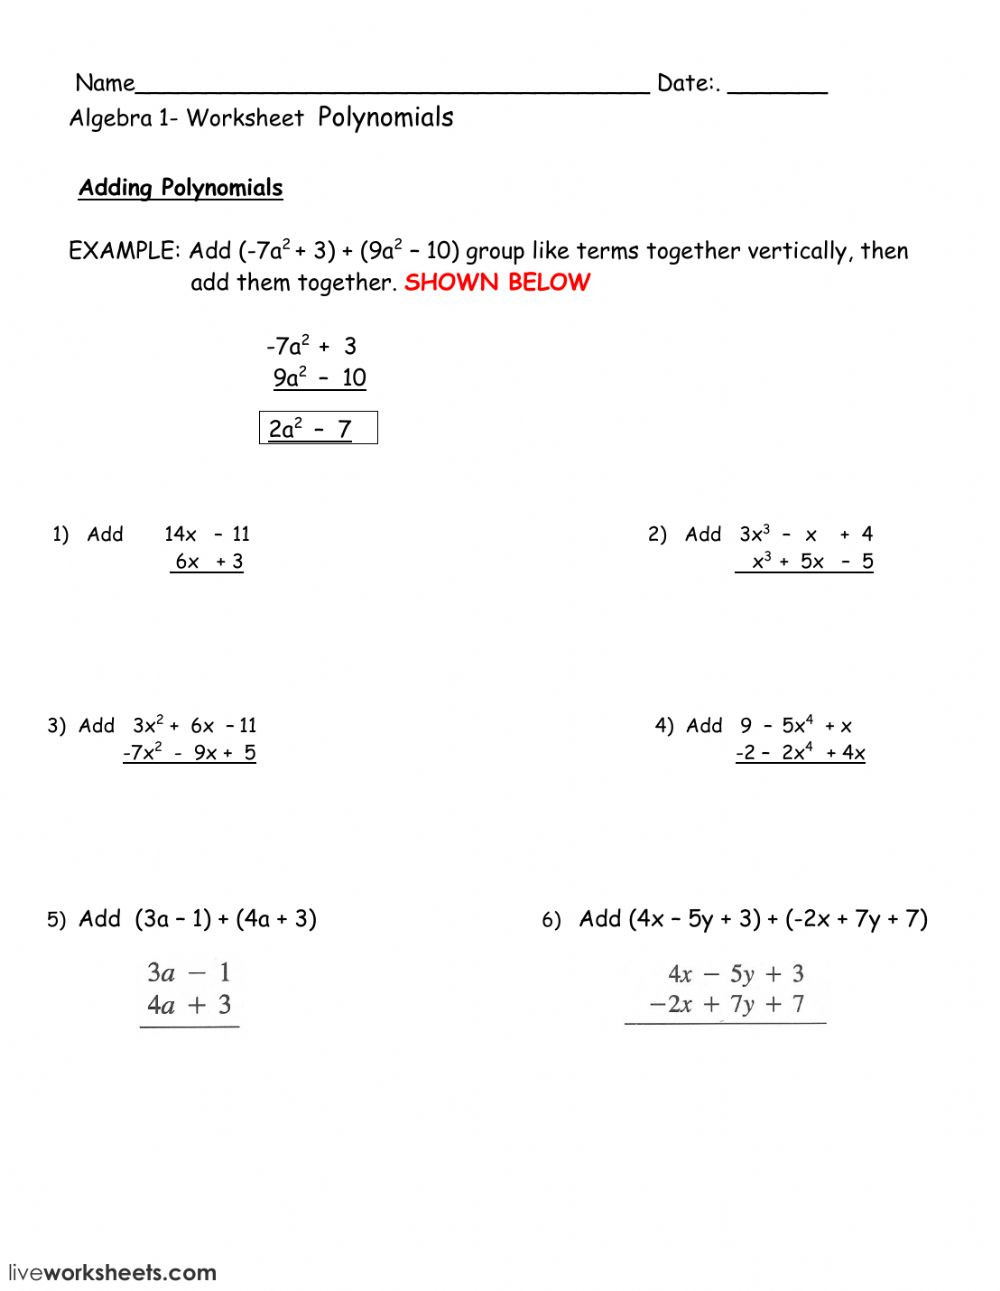 Adding and Subtracting Polynomials Worksheet Adding Polynomials Interactive Worksheet